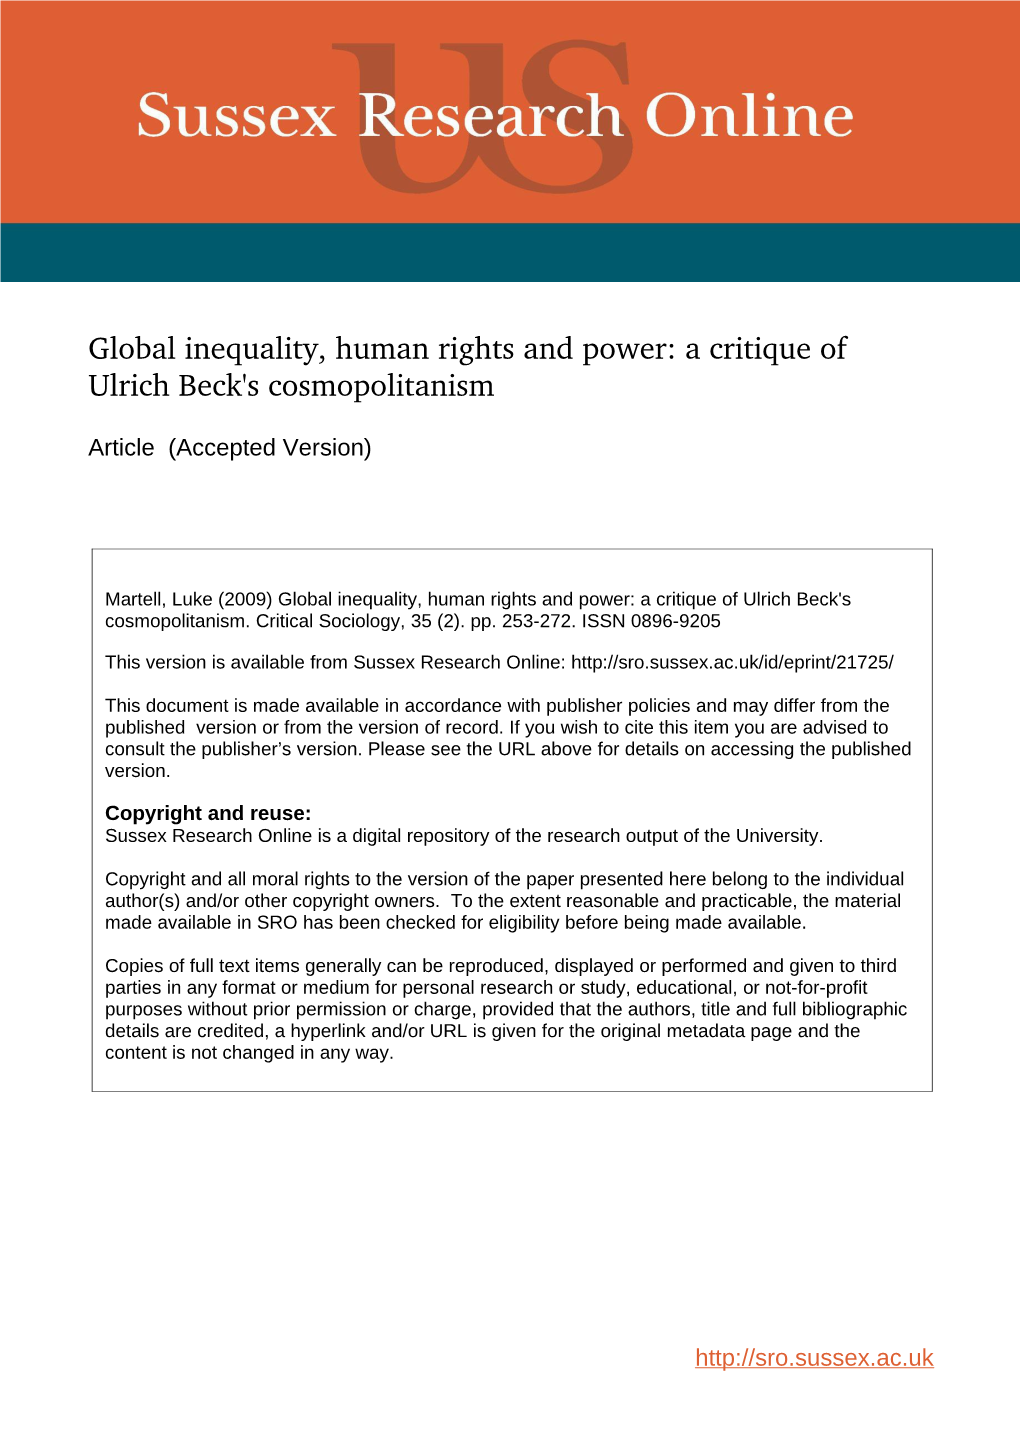 Global Inequality, Human Rights and Power: a Critique of Ulrich Beck's Cosmopolitanism